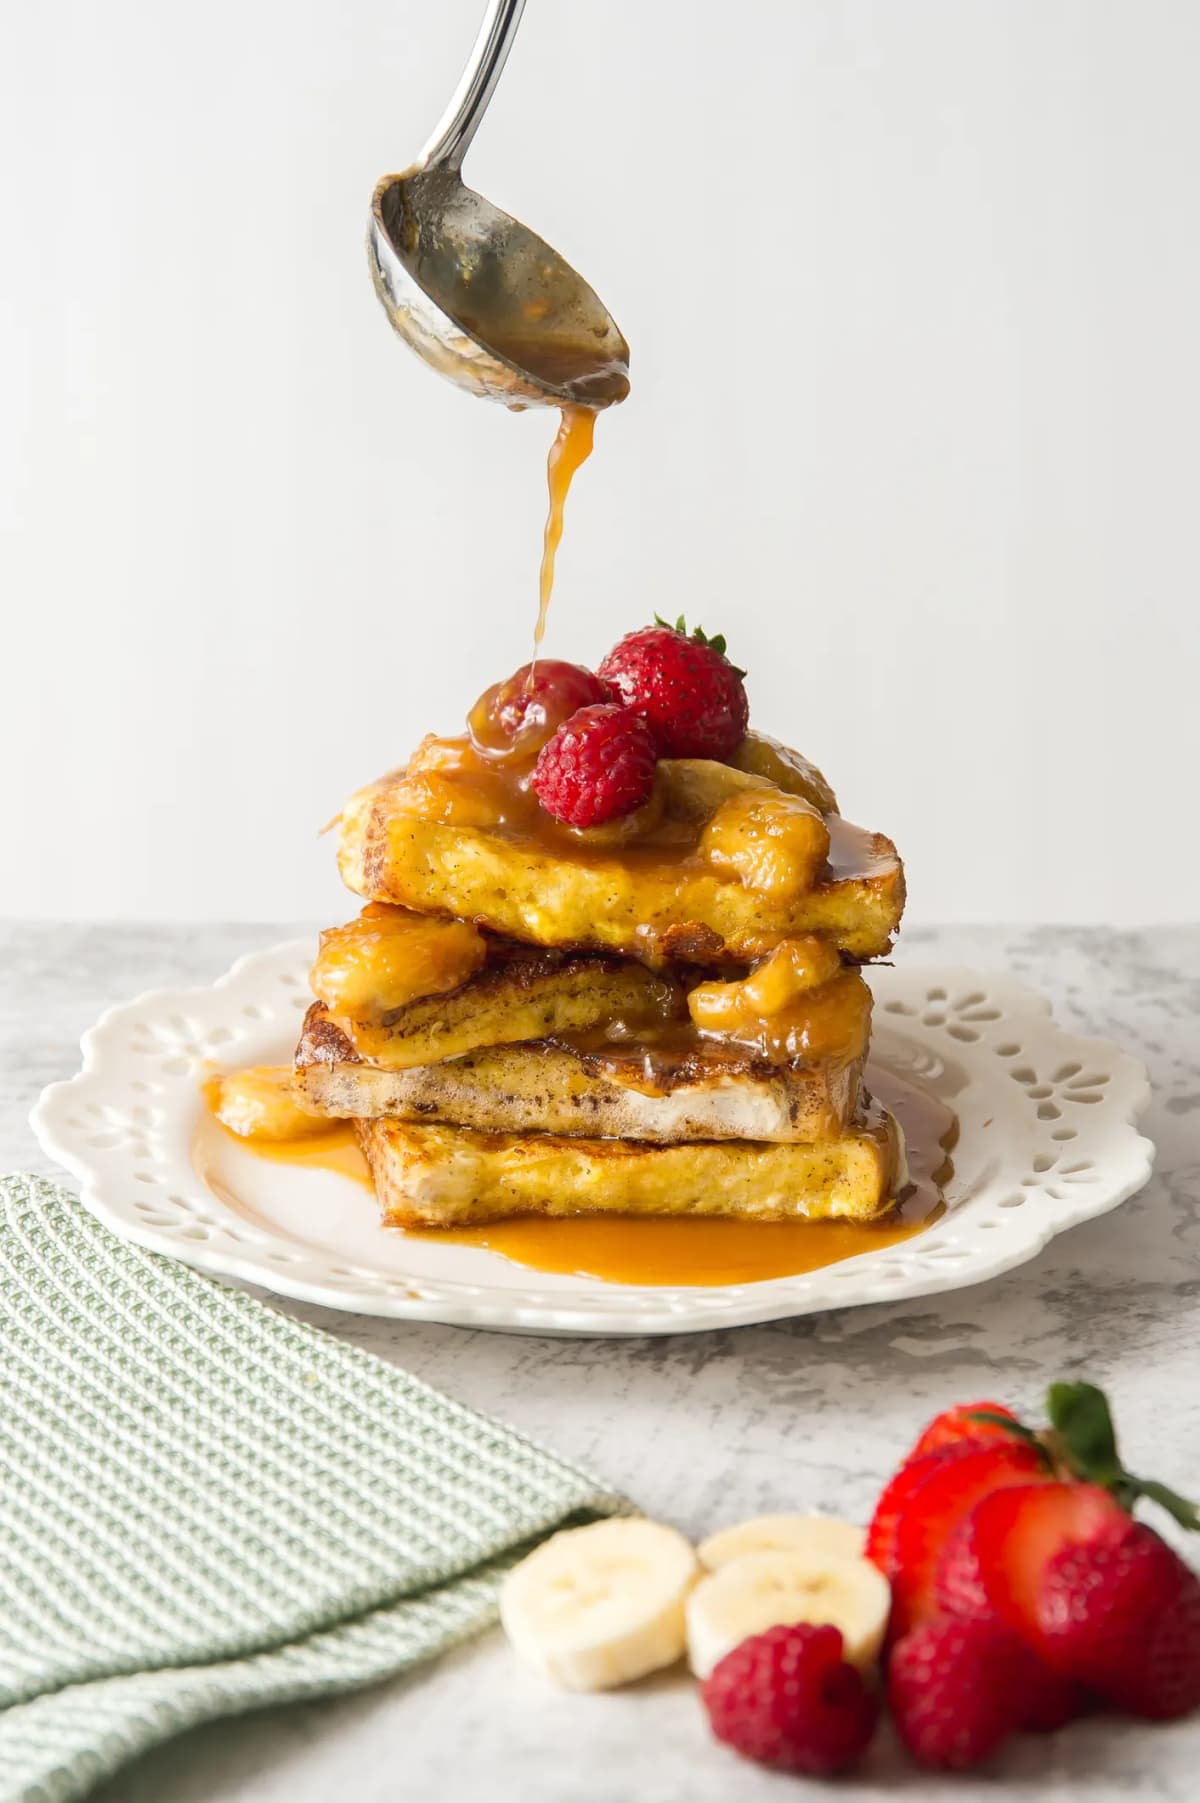 Caramel being poured on French toast with fruits